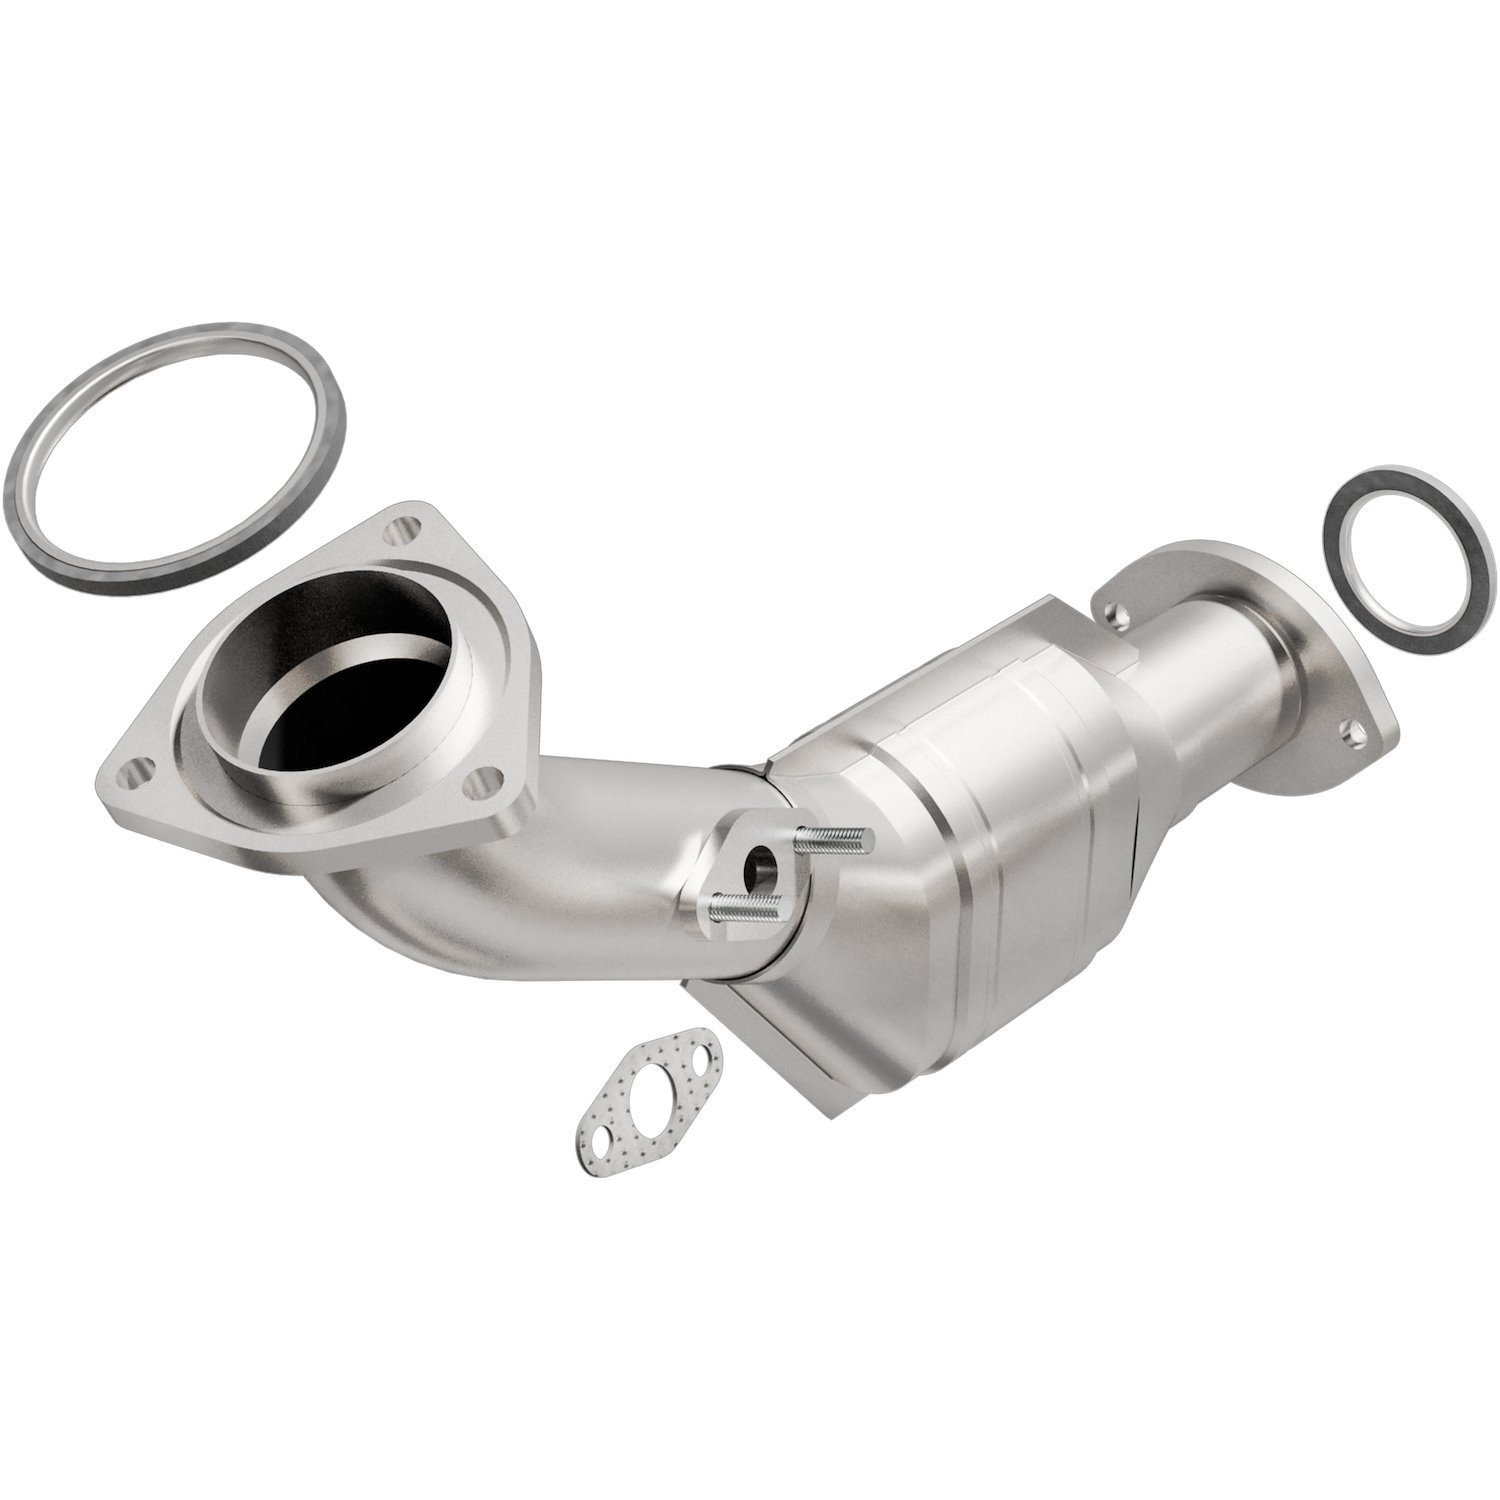 2000-2004 Toyota Tacoma California Grade CARB Compliant Direct-Fit Catalytic Converter